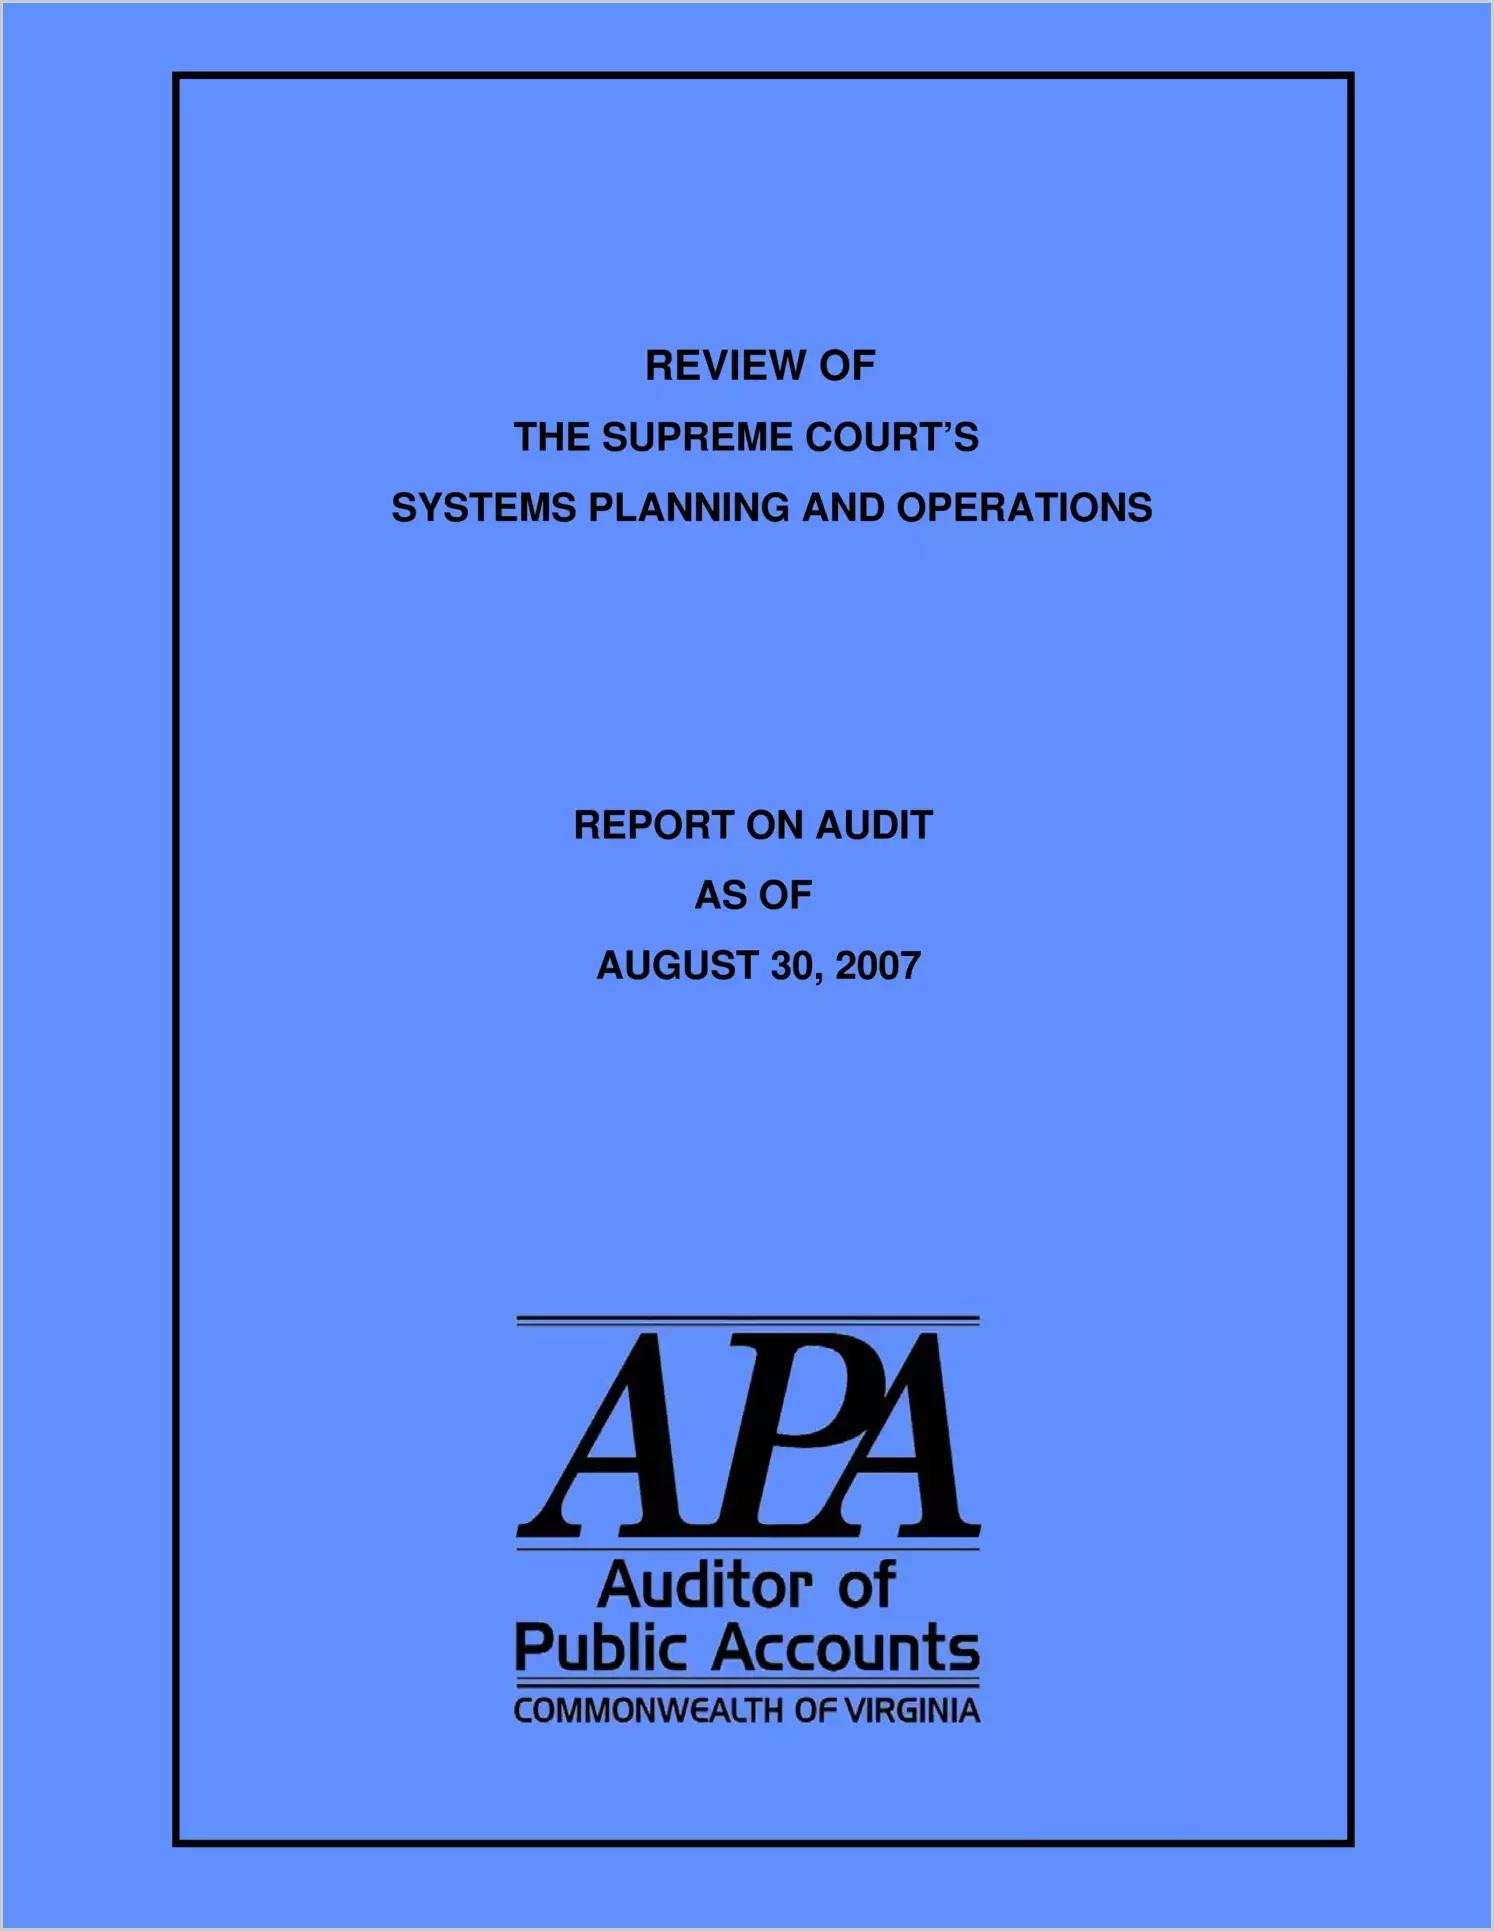 Review of the Supreme Courts Systems Planning and Operations as of August 30, 2007